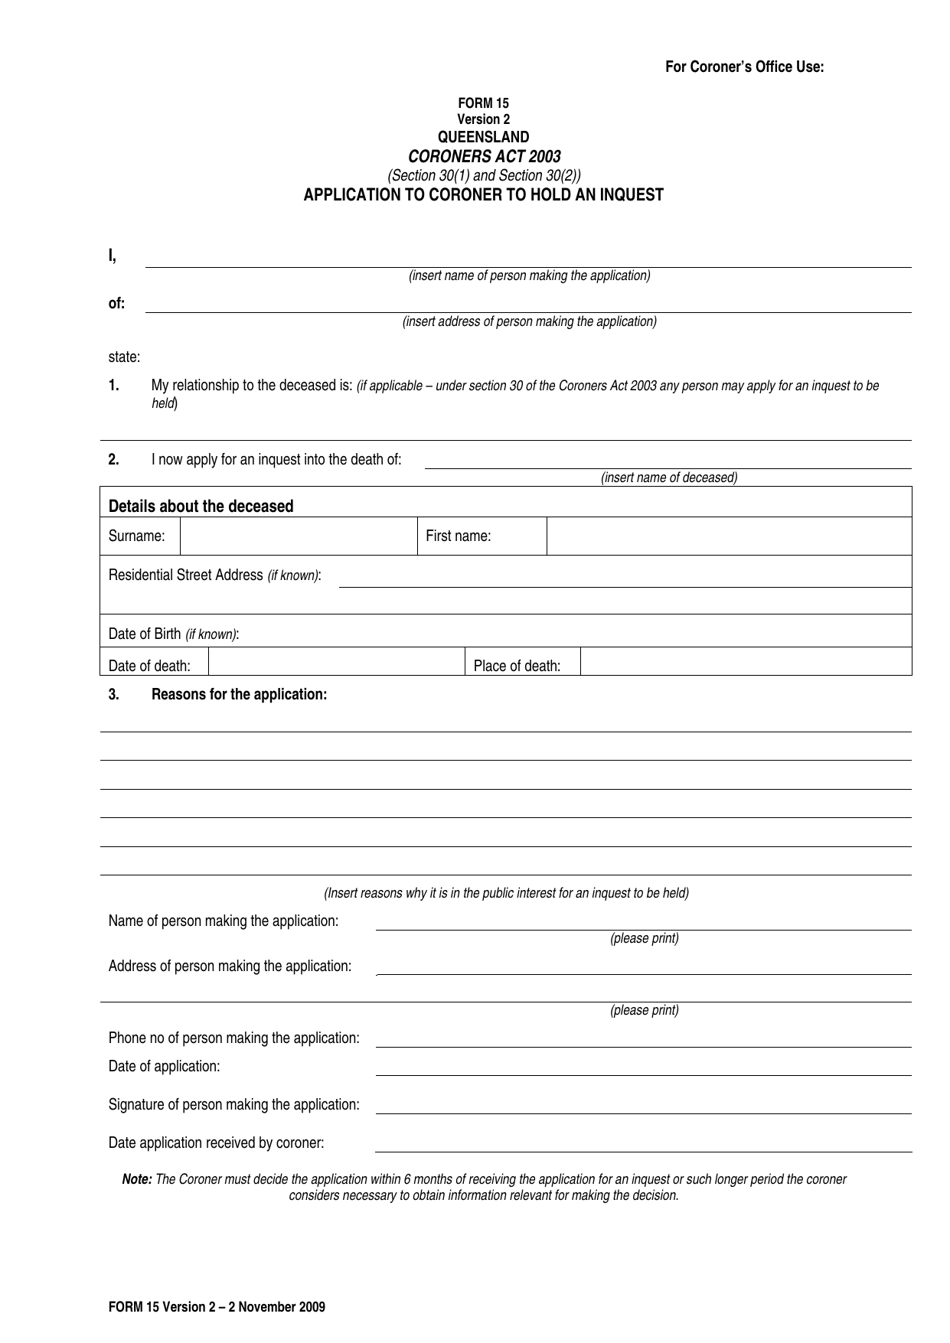 Form 15 Application to Coroner to Hold an Inquest - Queensland, Australia, Page 1